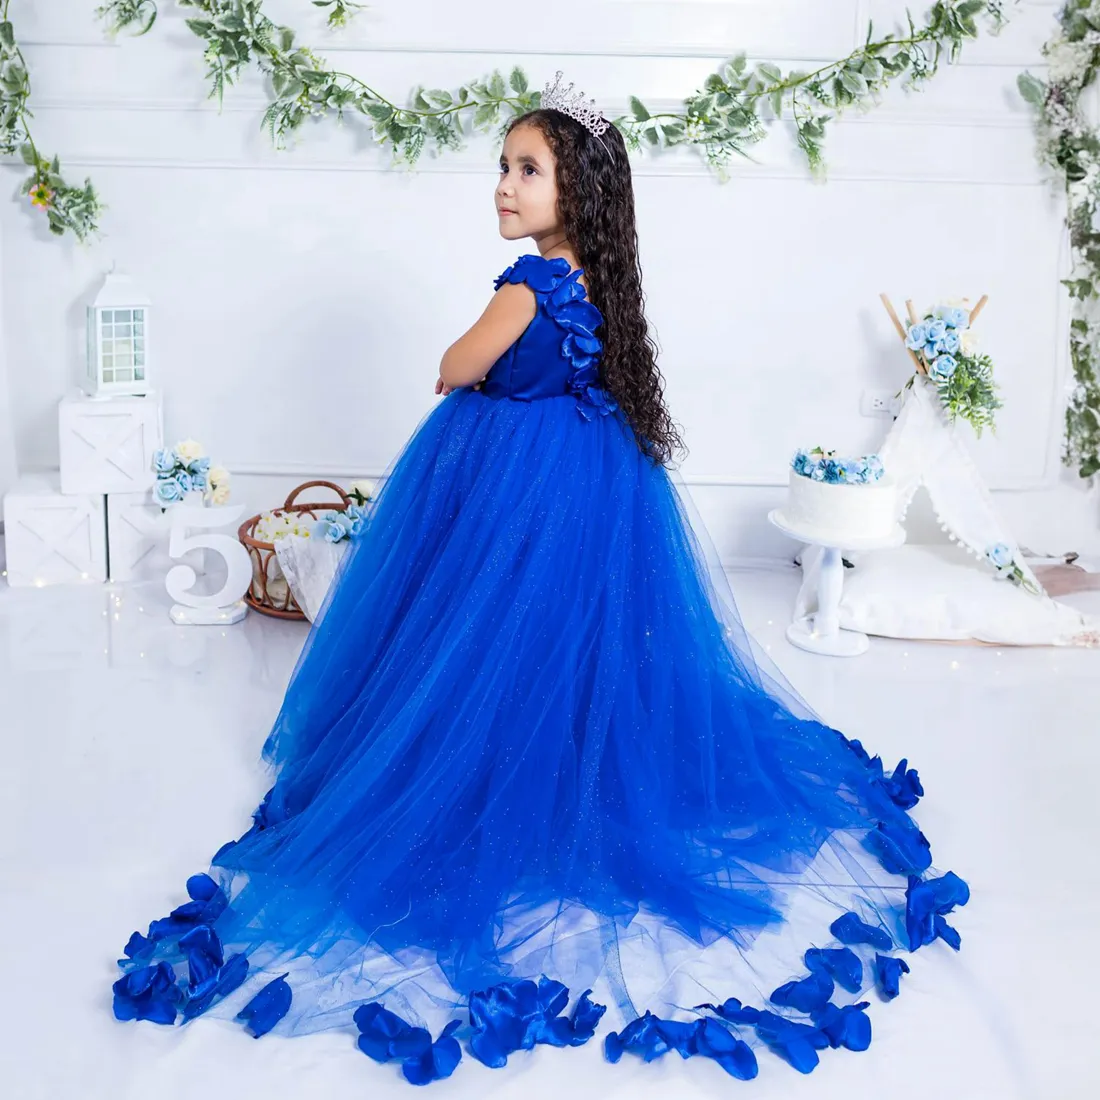 Shining Royal Blue Flower Girl Dresses Sheer Neck Puffy Pleated Tiered Tulle Ball Gowns for little Girls for Wedding Appliqued Lace Beaded Bridal Gowns NF112